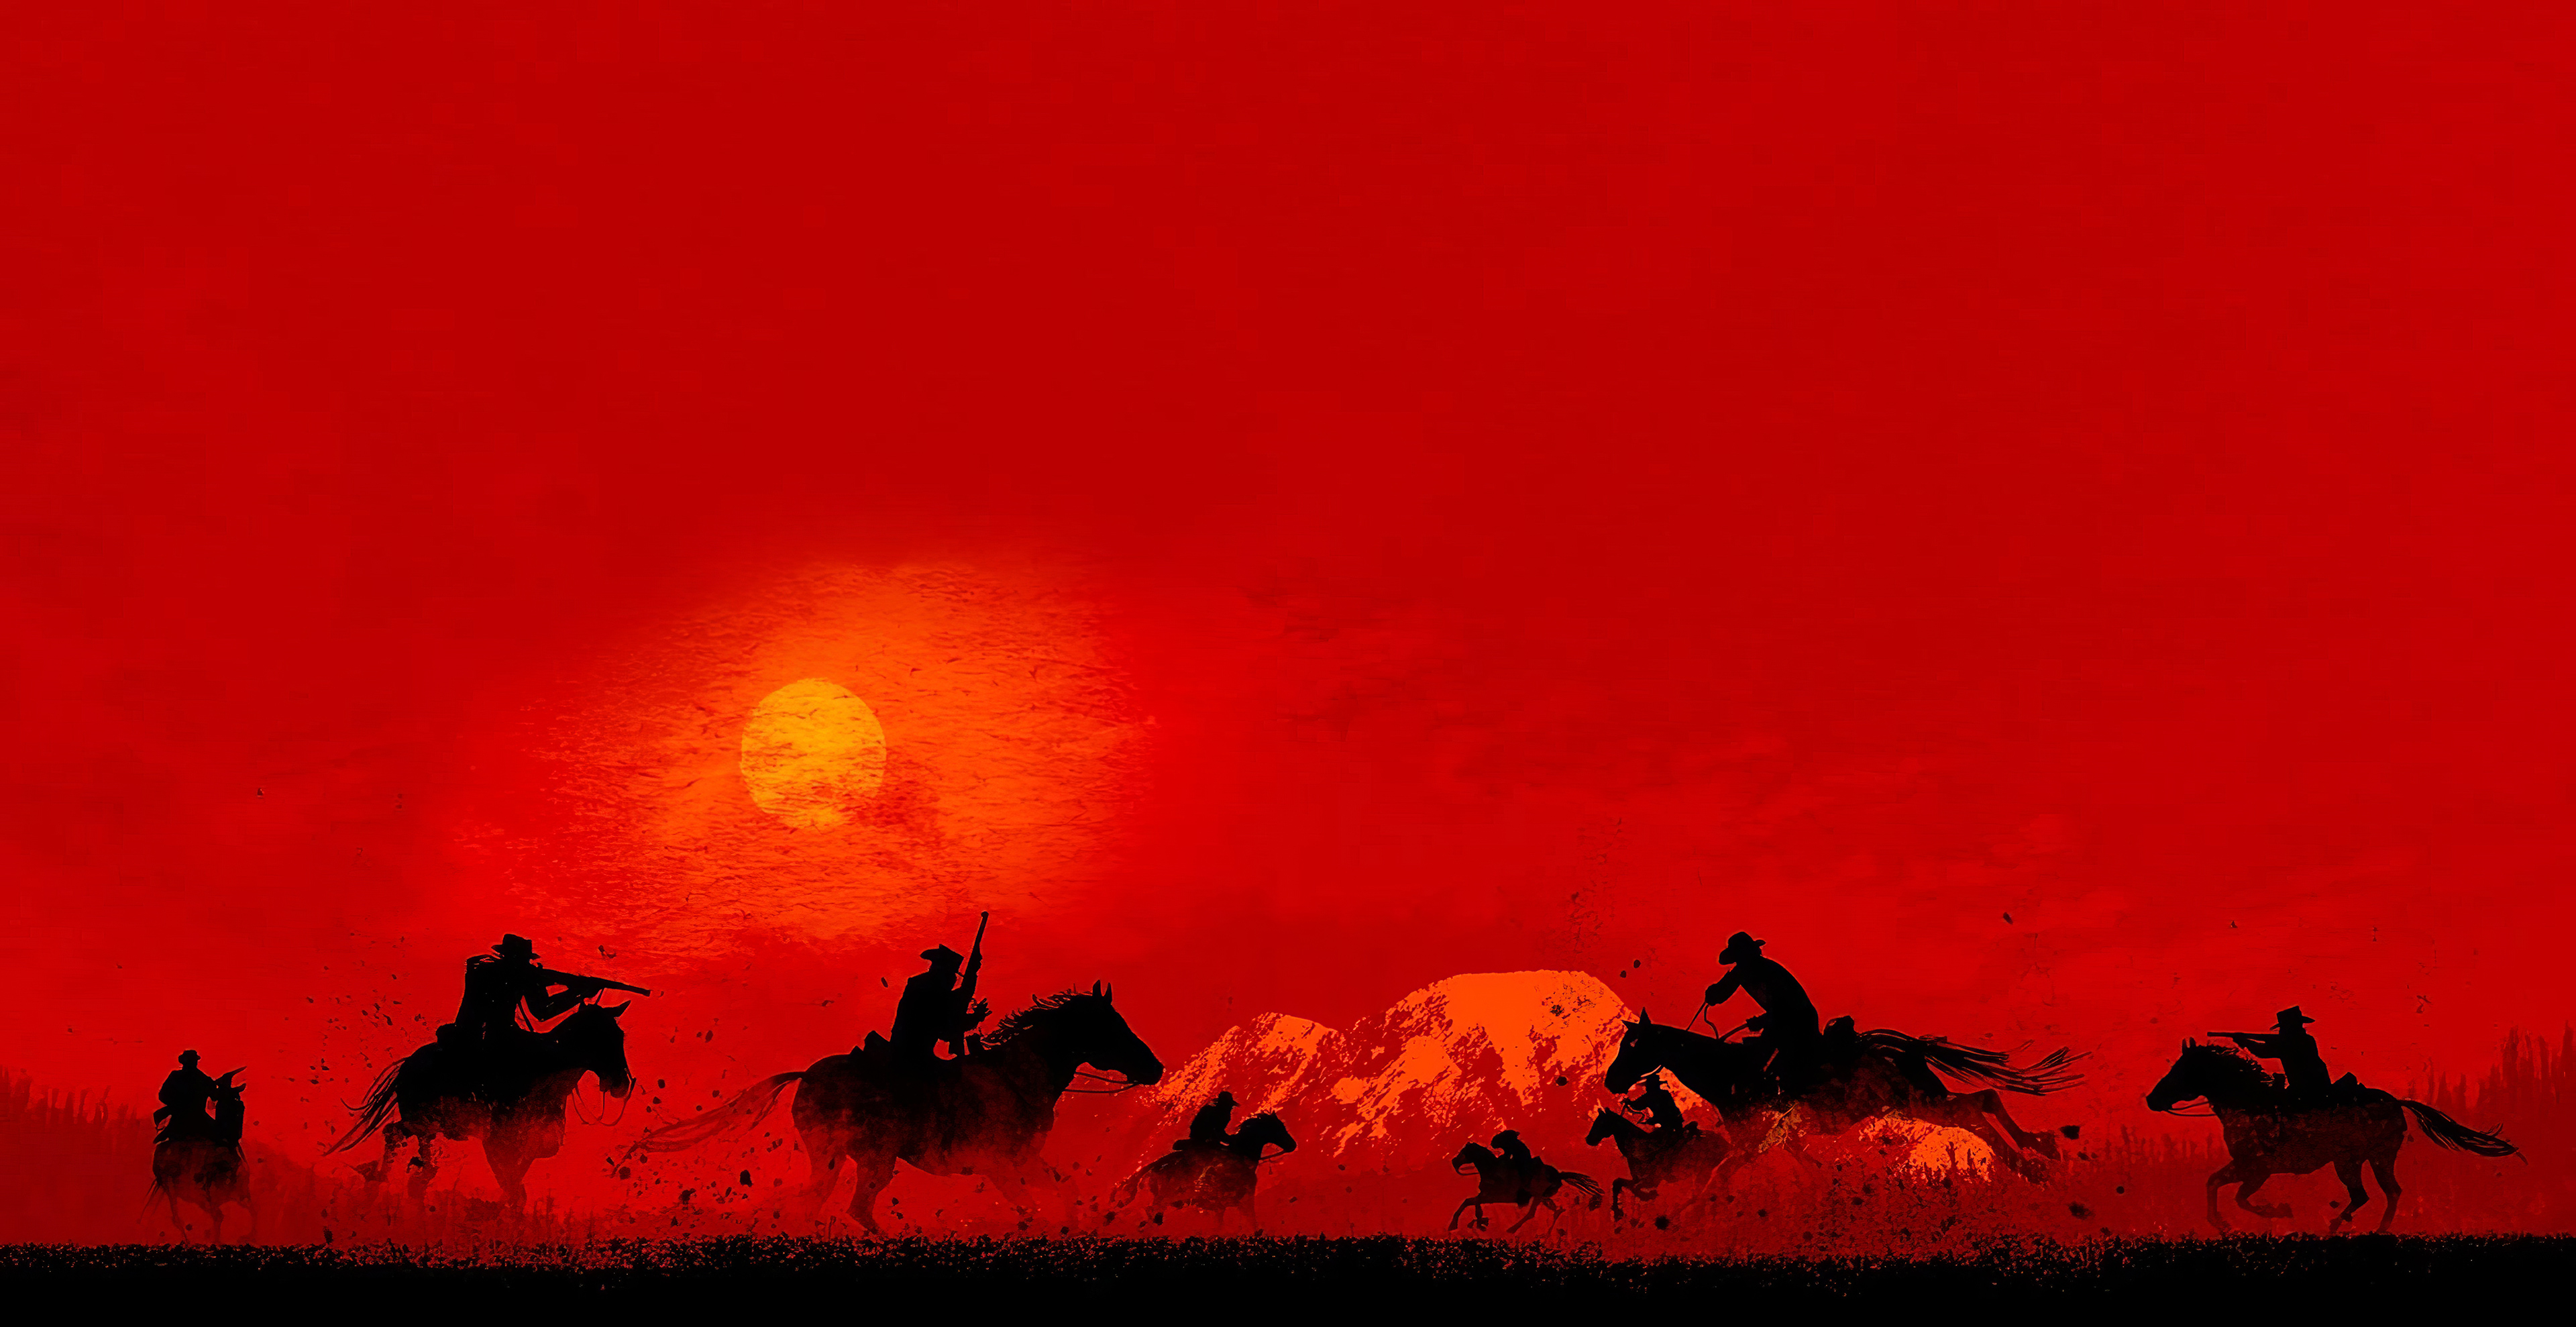 Red Dead Redemption 2 Game 2019 Wallpaper, HD Games 4K Wallpapers, Images, Photos and Background